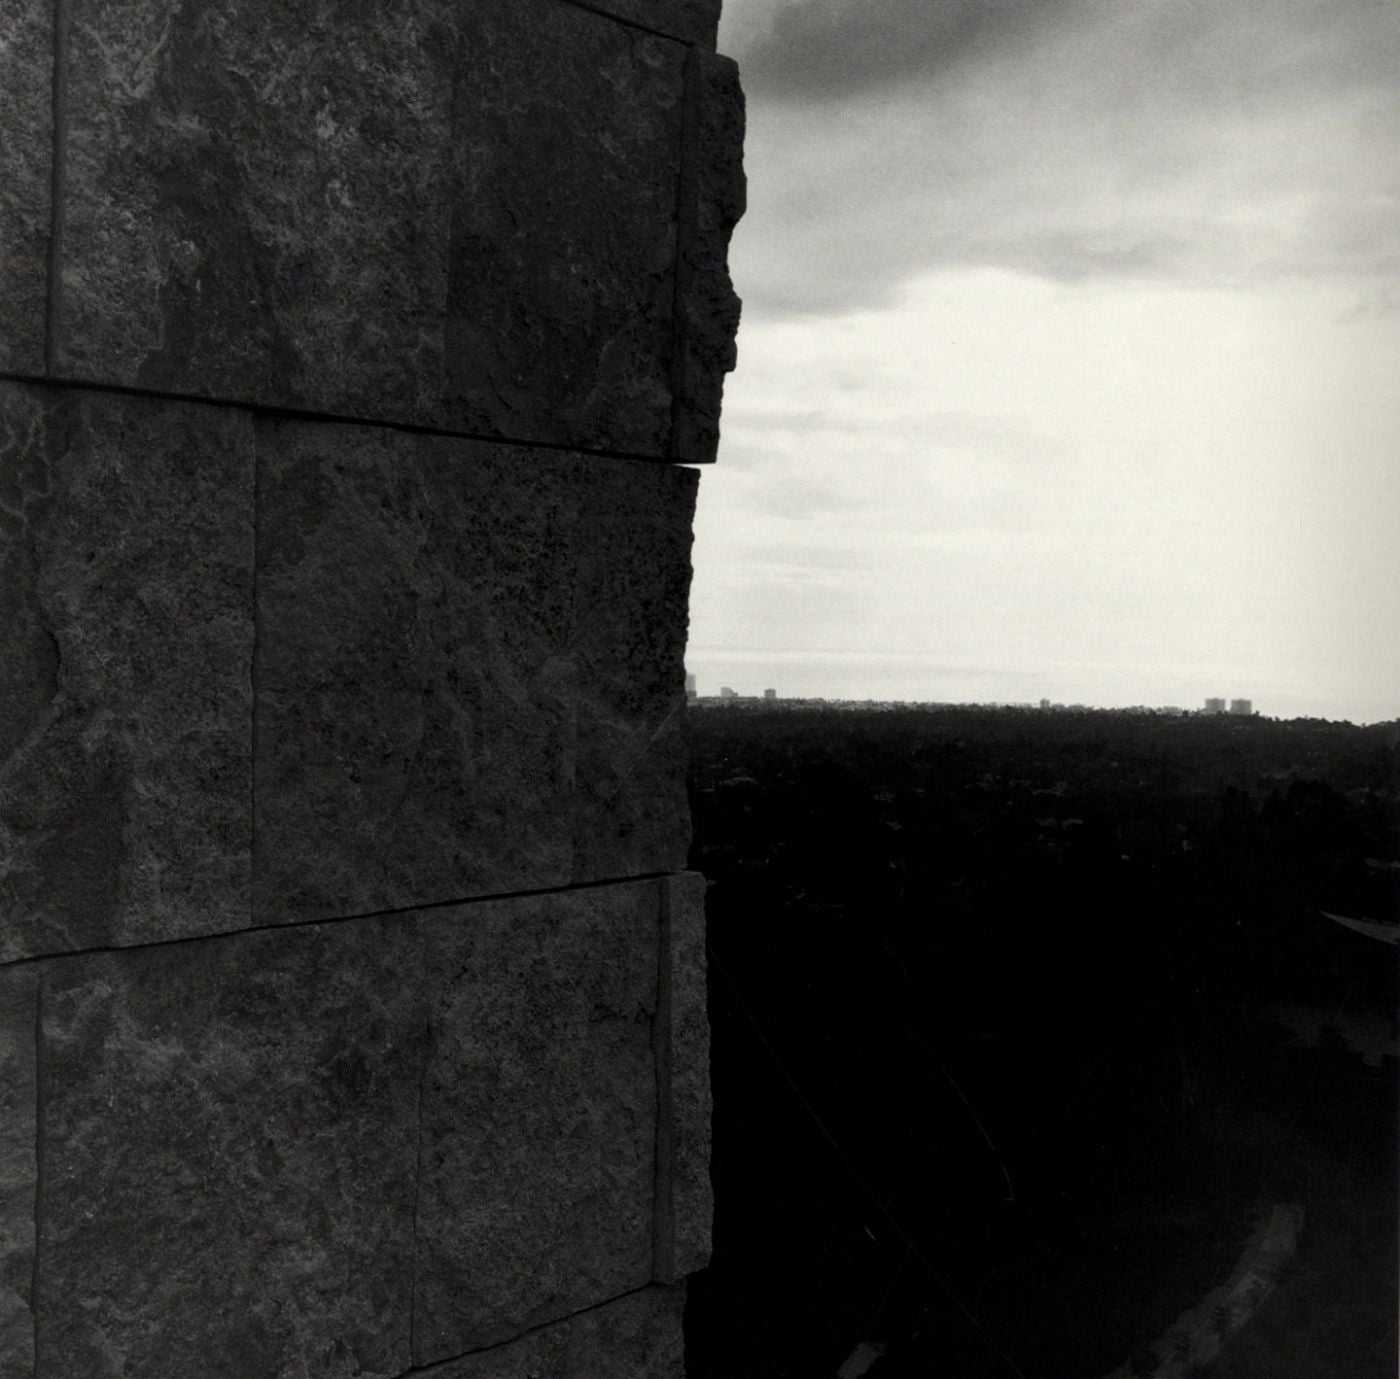 Between Nature and Culture: Photographs of the Getty Center by Joe Deal